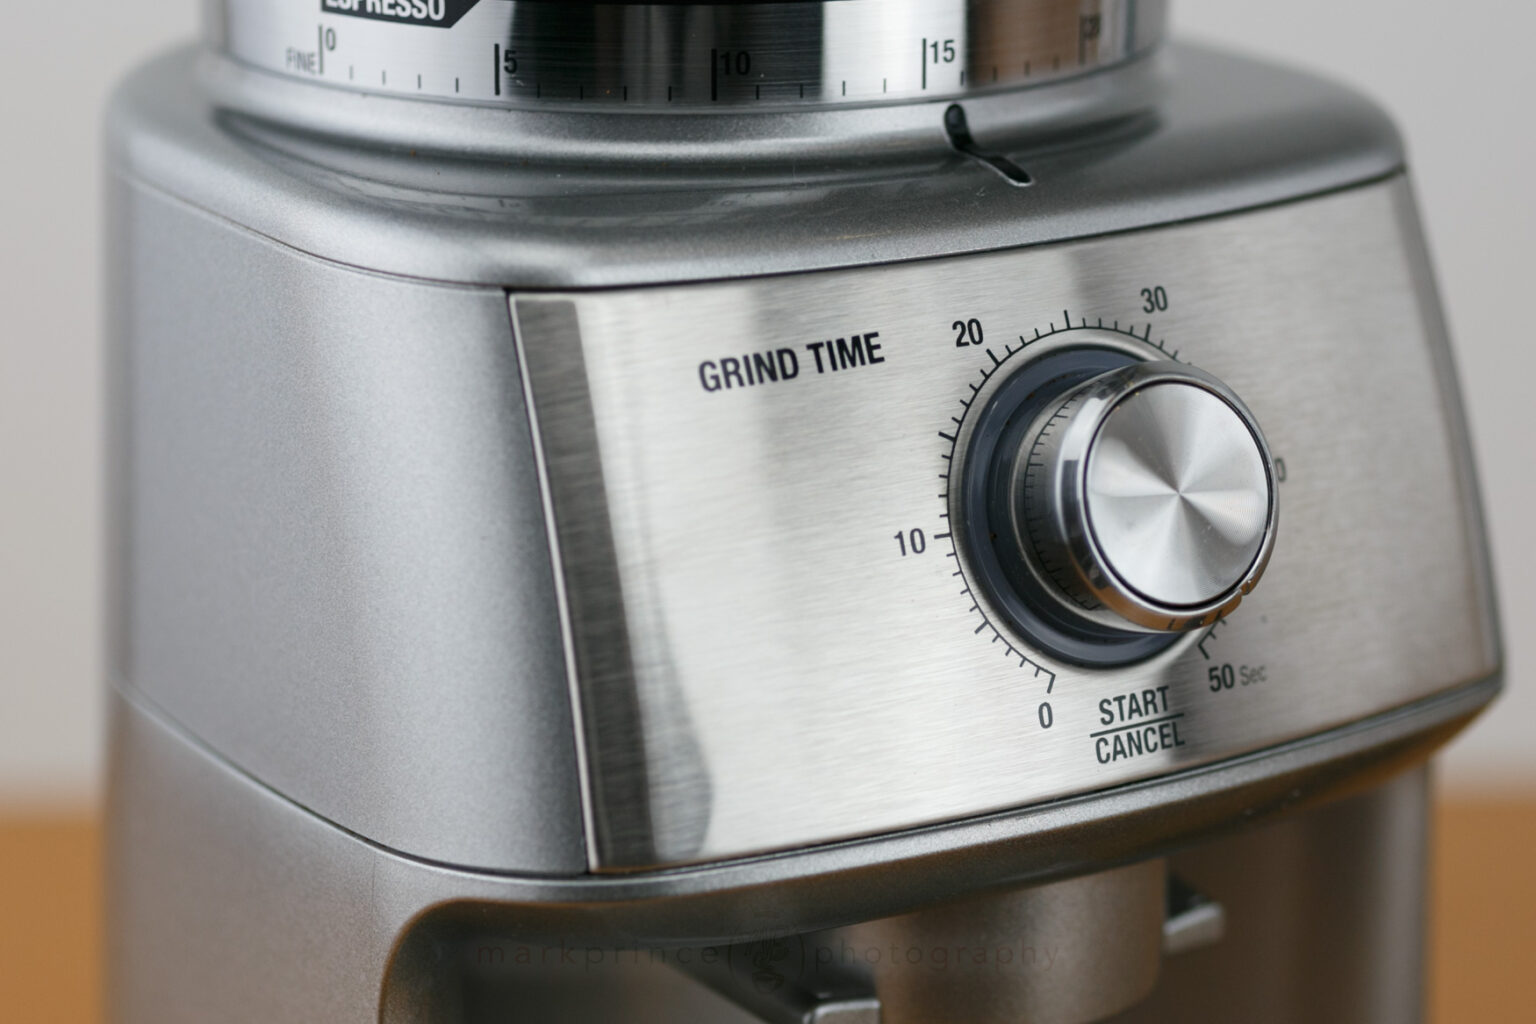 1 second just doesn't cut it on a grinder designed for espresso, that grinds up to 2g/second.